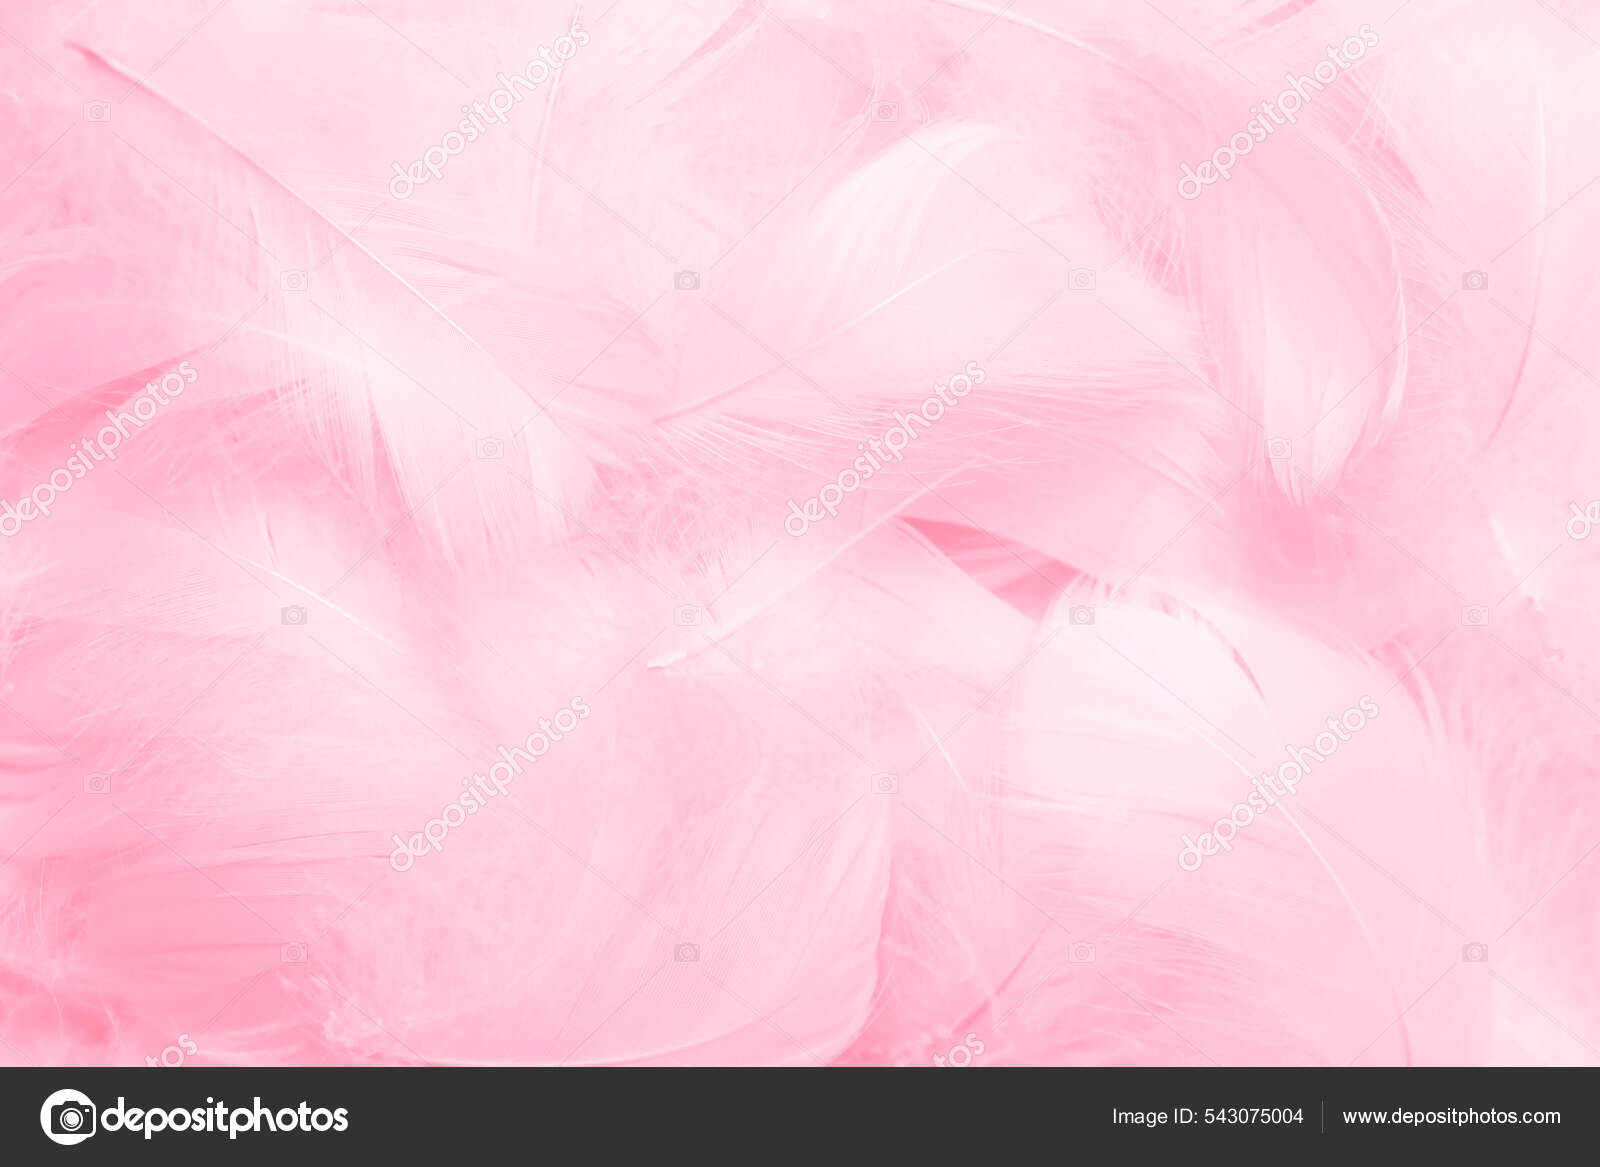 Pink feather background. Beautiful light pink feathers background